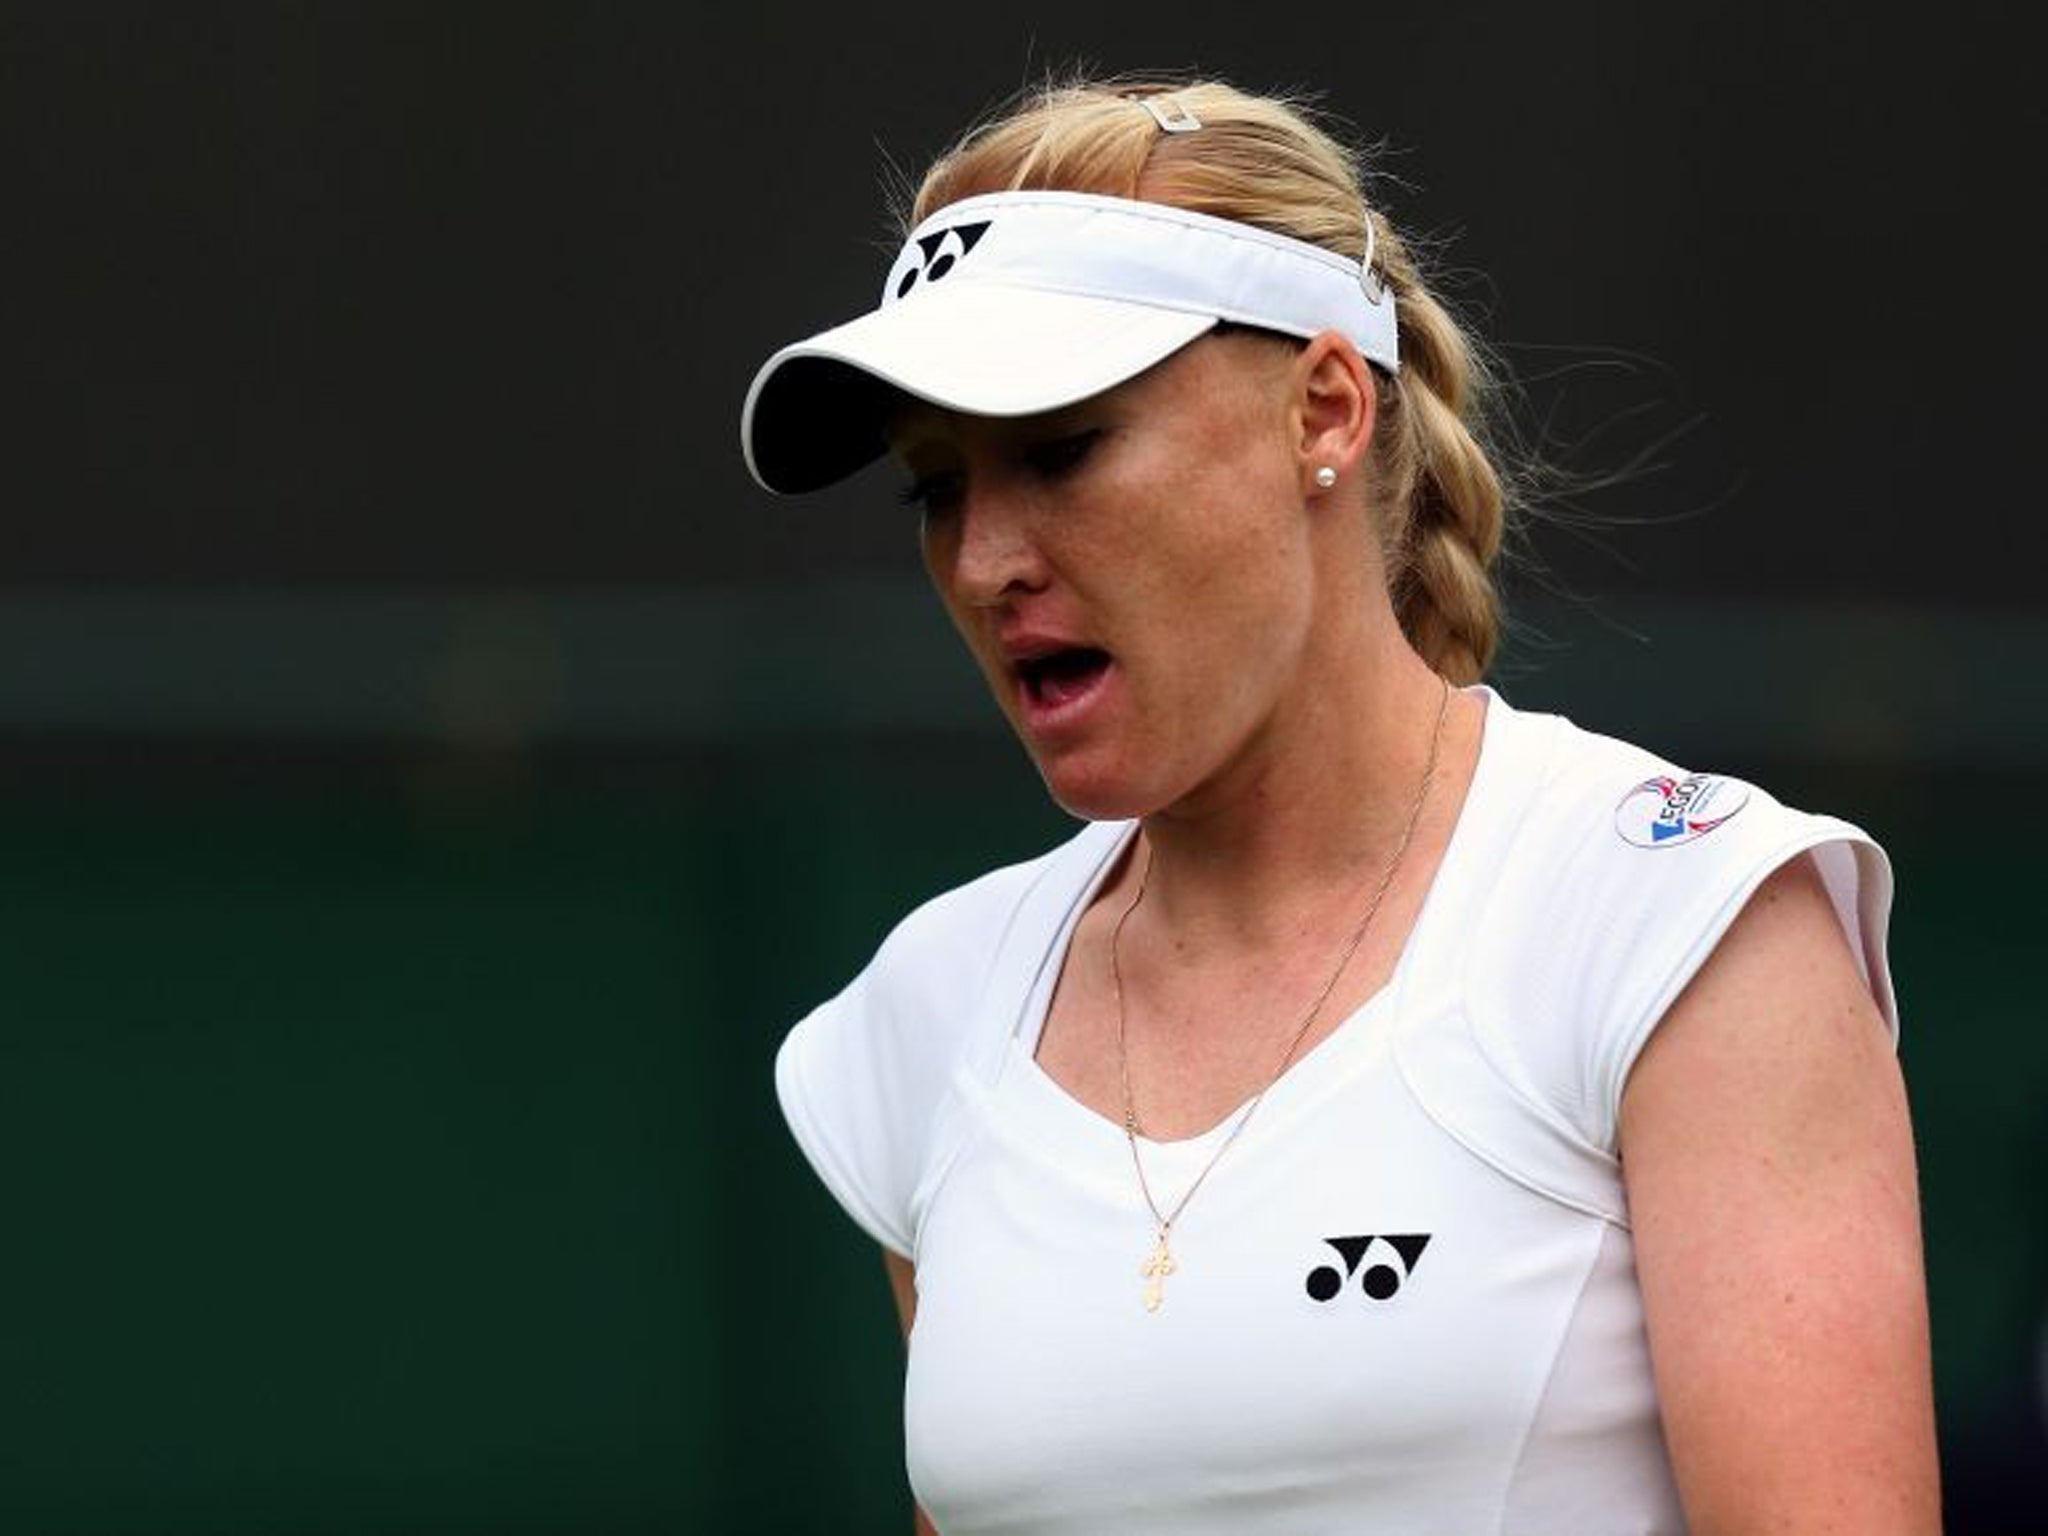 Elena Baltacha, Britain's number six, was knocked out in the first round